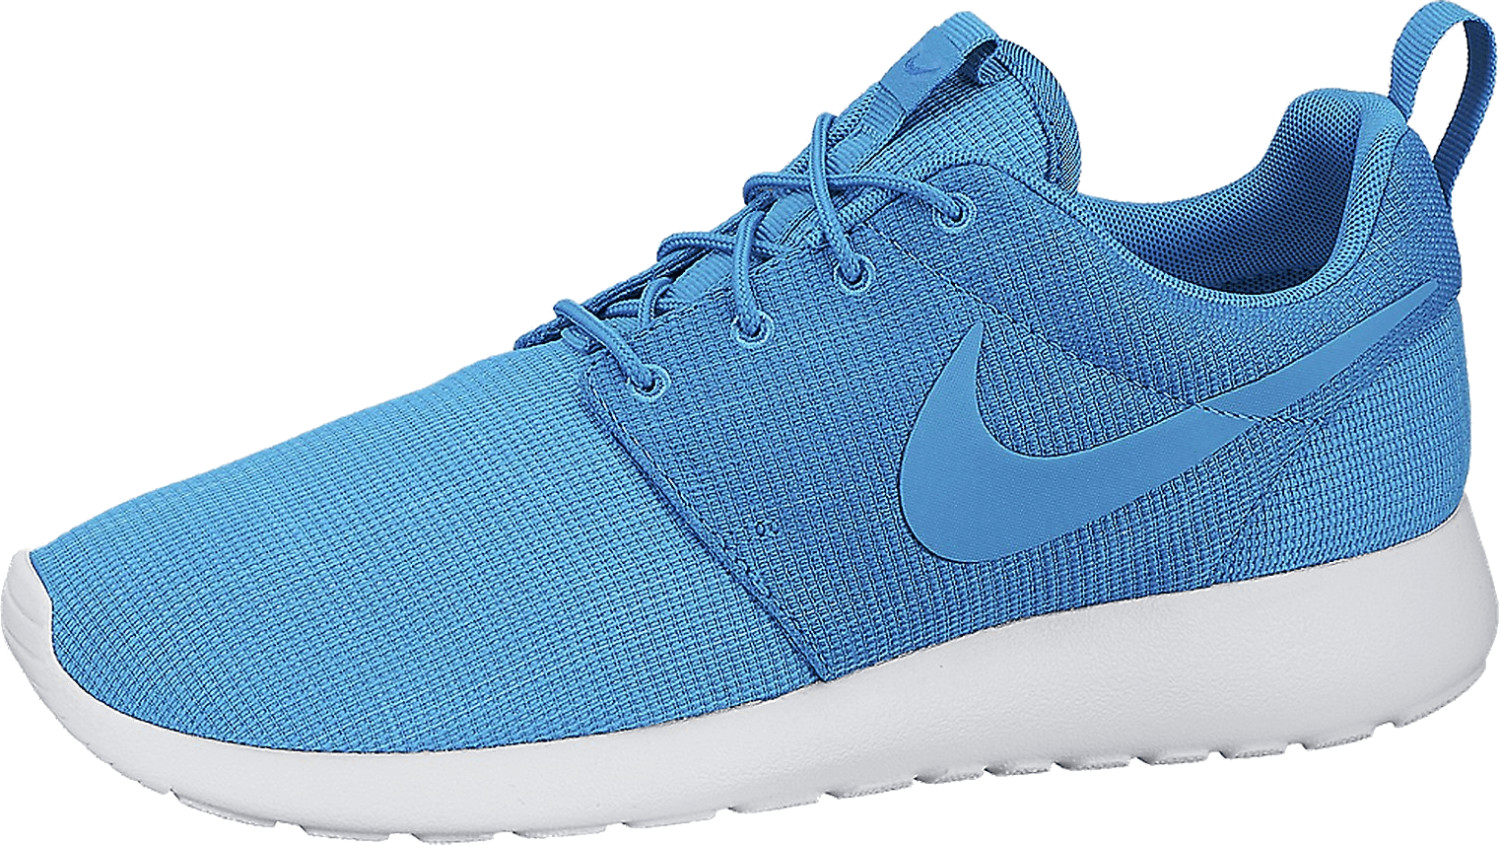 Buy Nike Roshe One from £130.13 (Today) – Best Deals on idealo.co.uk